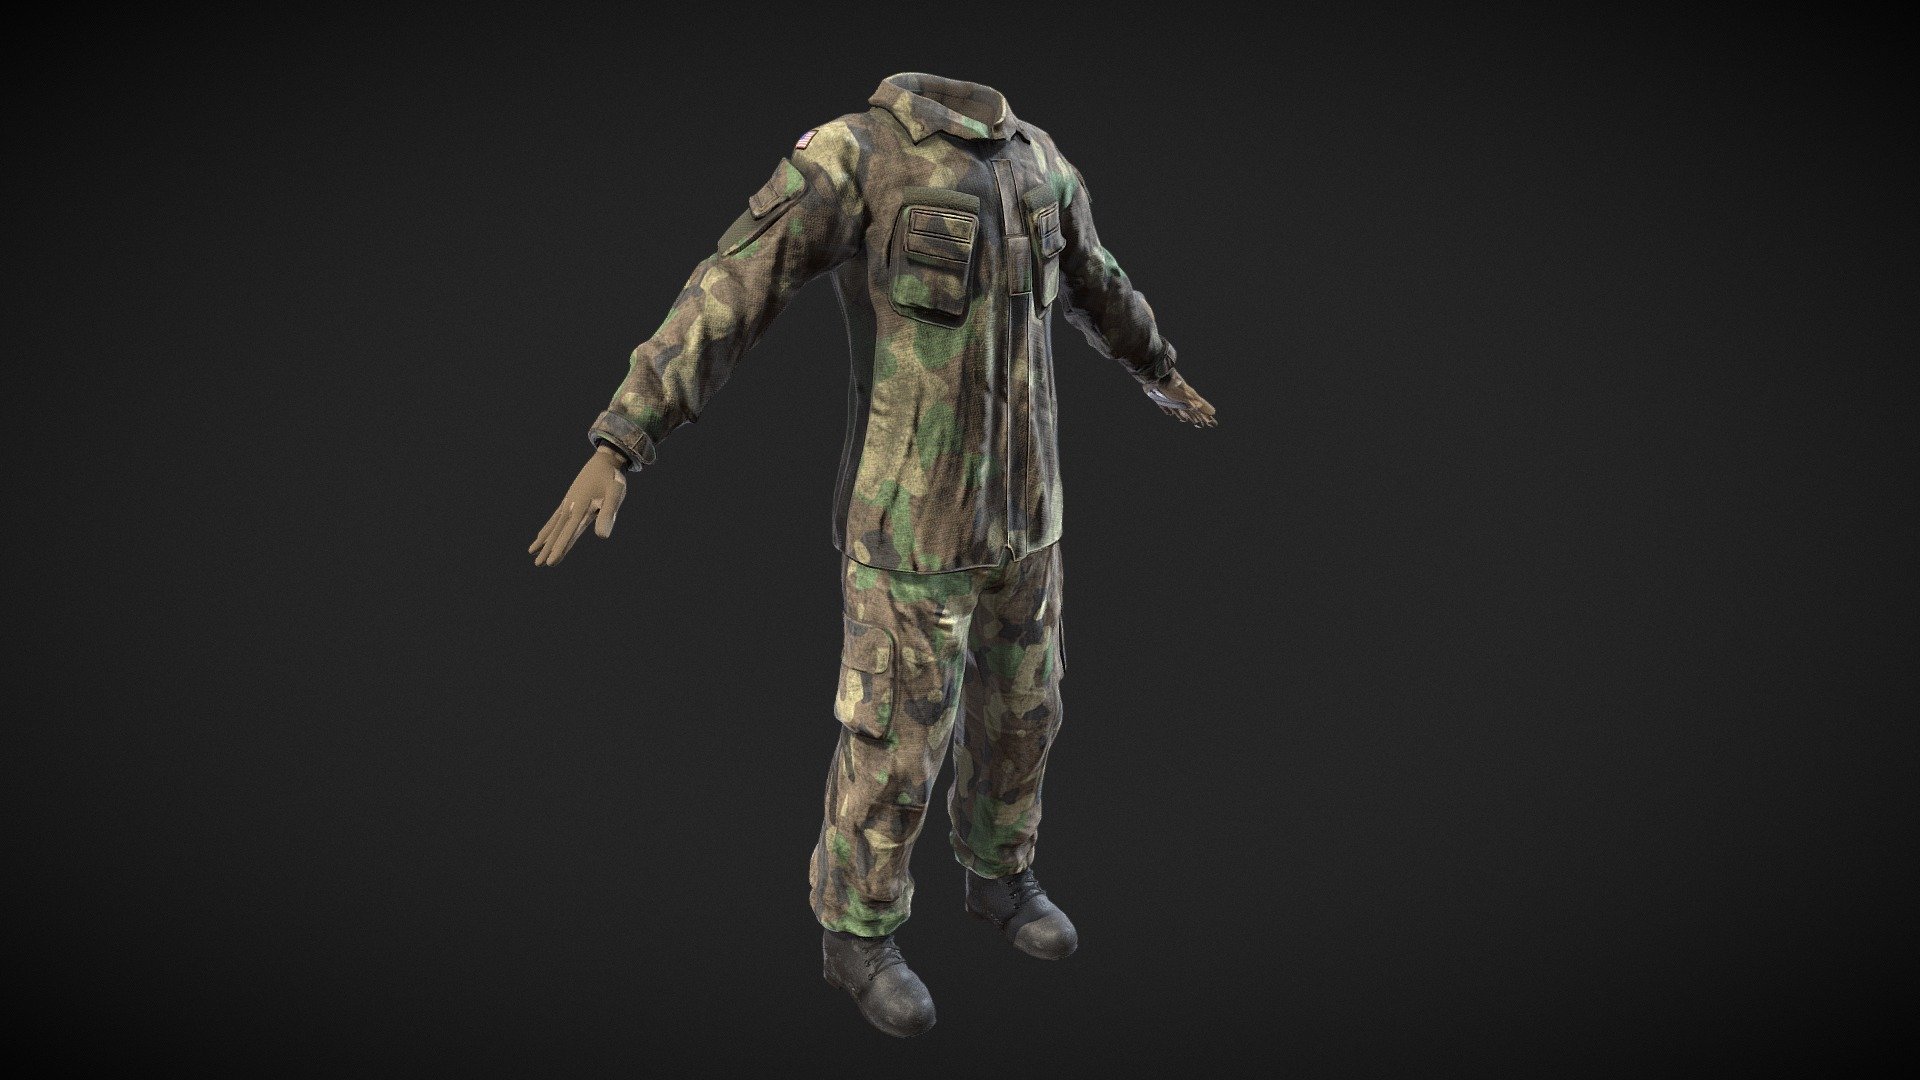 US Military Woodland Uniform M80 - Model/Art by Outworld Studios

Must give credit to Outworld Studios if using the asset.

Show support by joining my discord: https://discord.gg/EgWSkp8Cxn - US Military Woodland Uniform M80 - Buy Royalty Free 3D model by Outworld Studios (@outworldstudios) 3d model